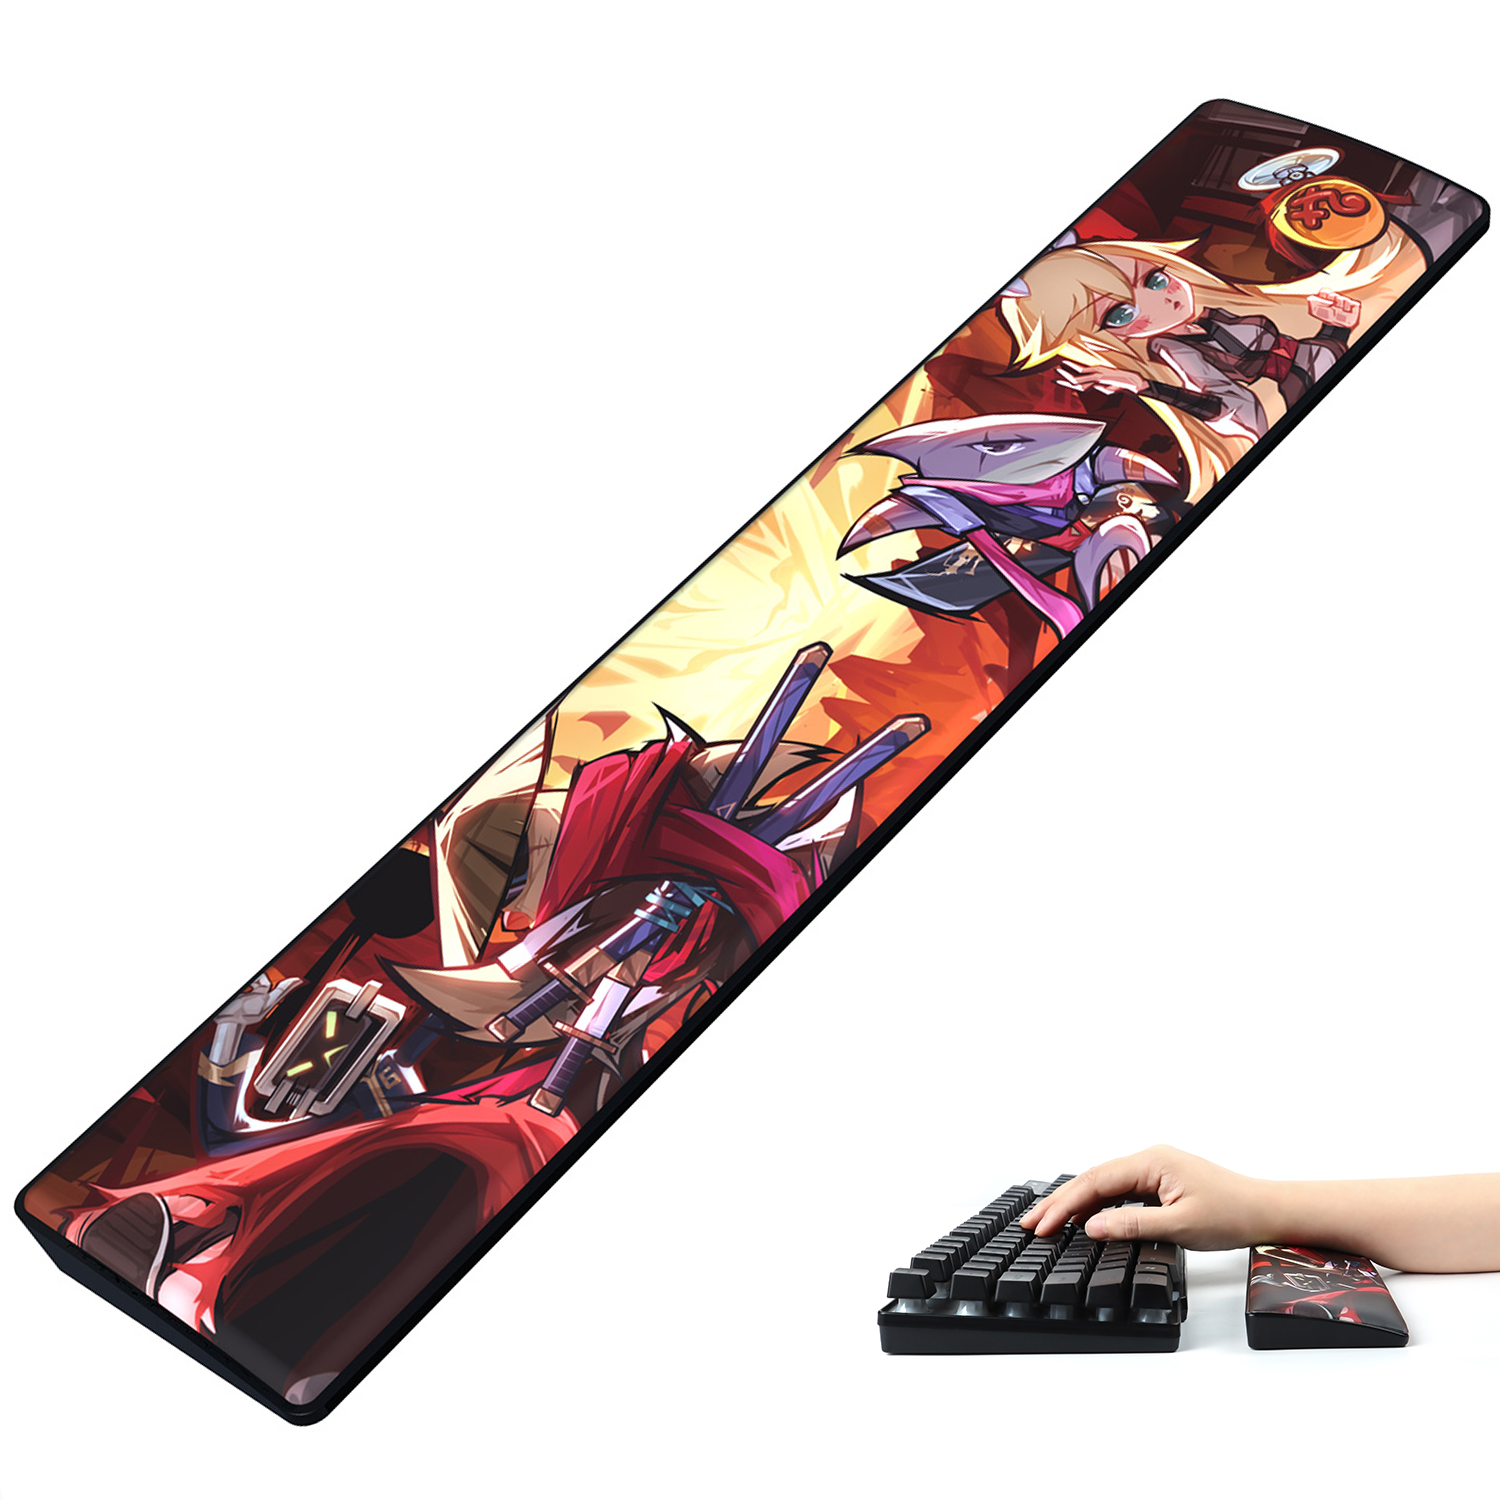 AJAZZ Wrist Rest for Full size Gaming Office Mechanical Wireless Bluetooth PC Keyboard Memory Foam Ergonomic Soft Faux Leather